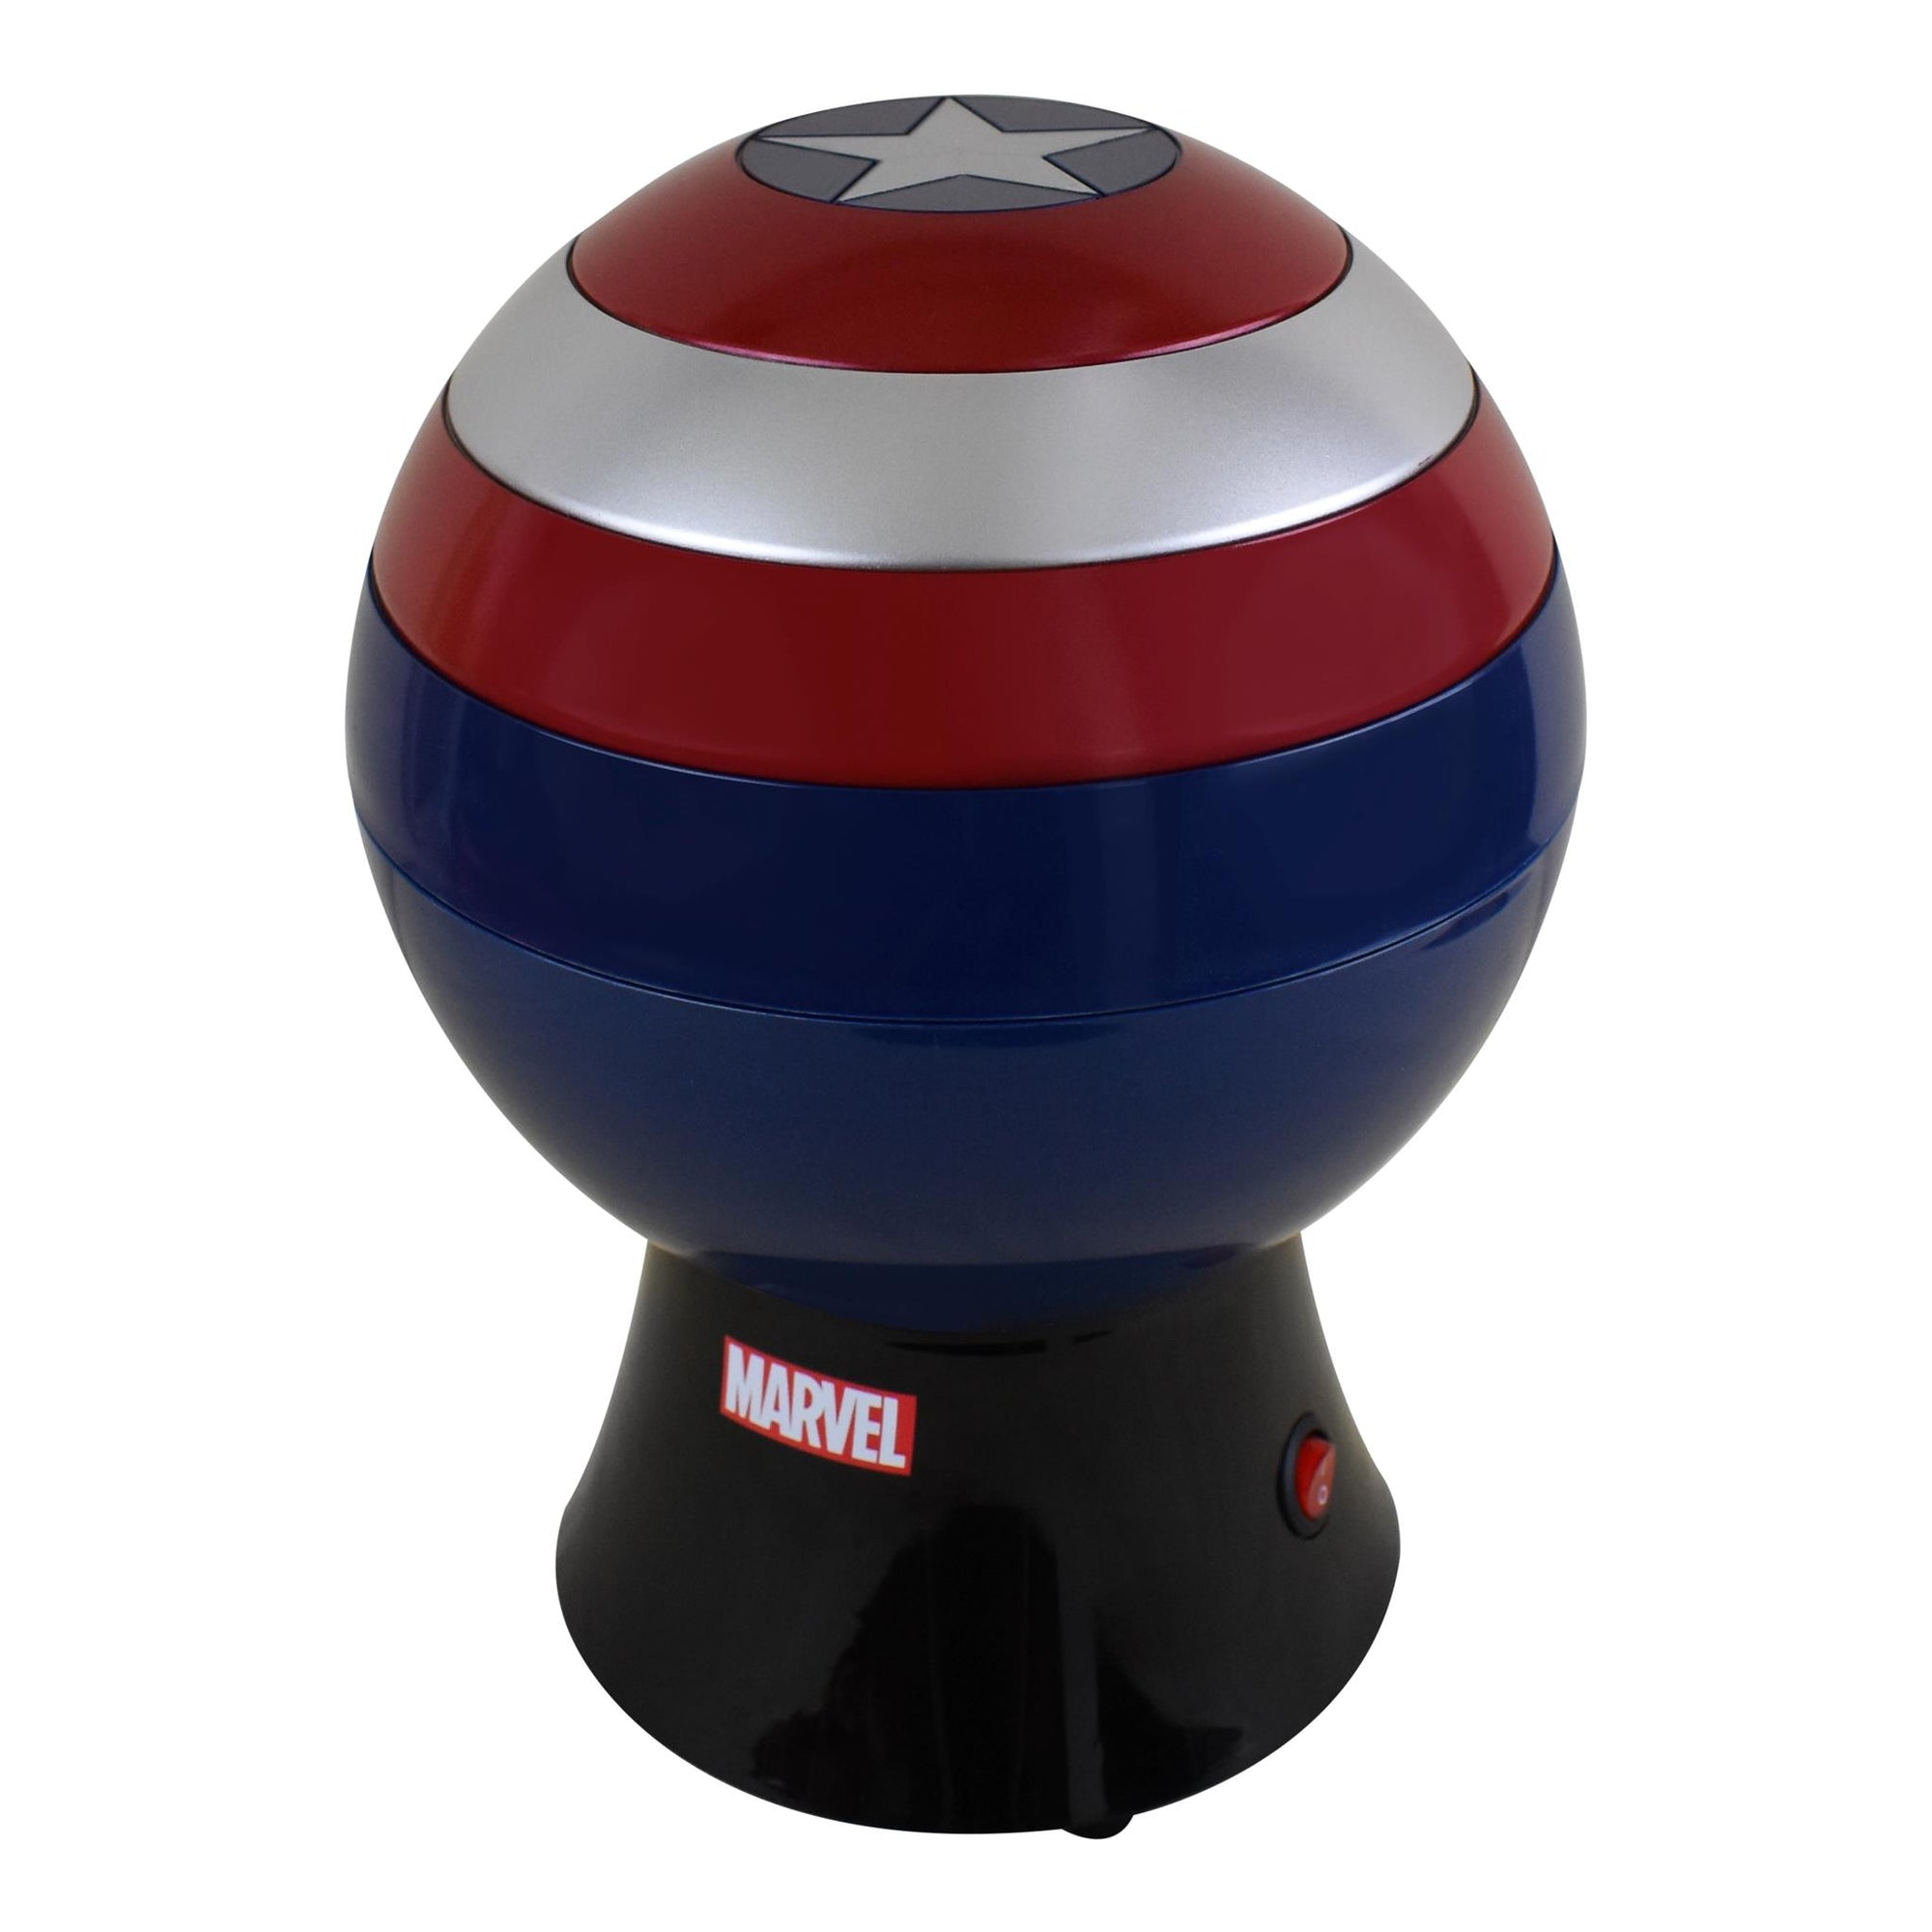 Uncanny Brands Introduces Marvel Captain America Popcorn Maker, Available Exclusively at Amazon.com